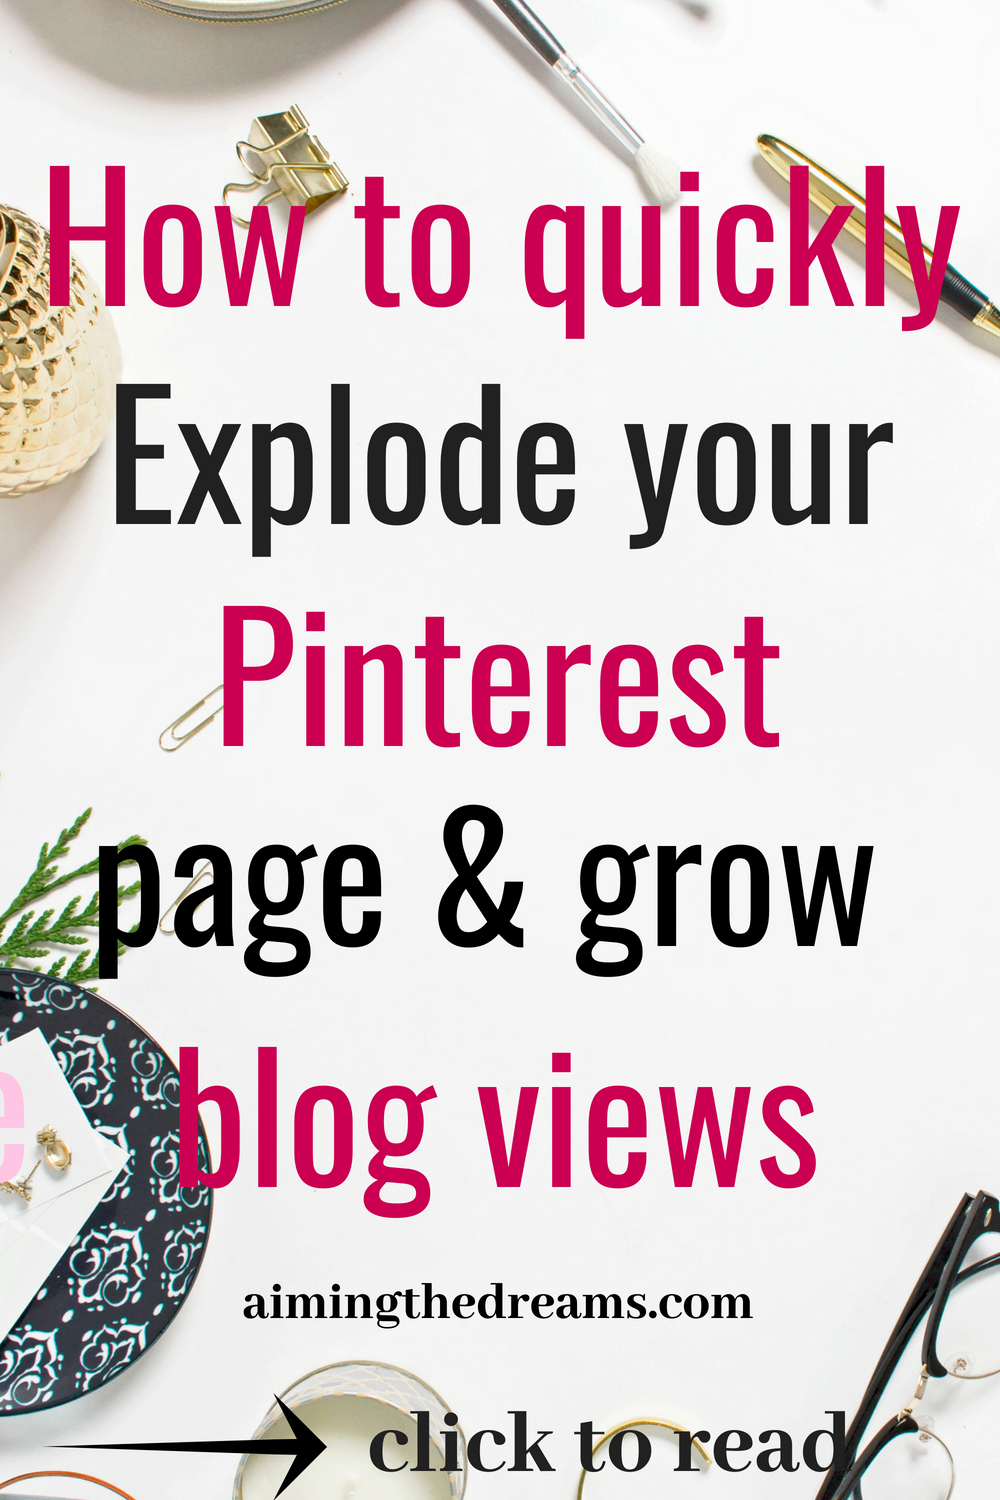 #How #to #grow #Pinterest #traffic and #increase #blog #views. This ebook will help you in mastering pinterest. Click to read.